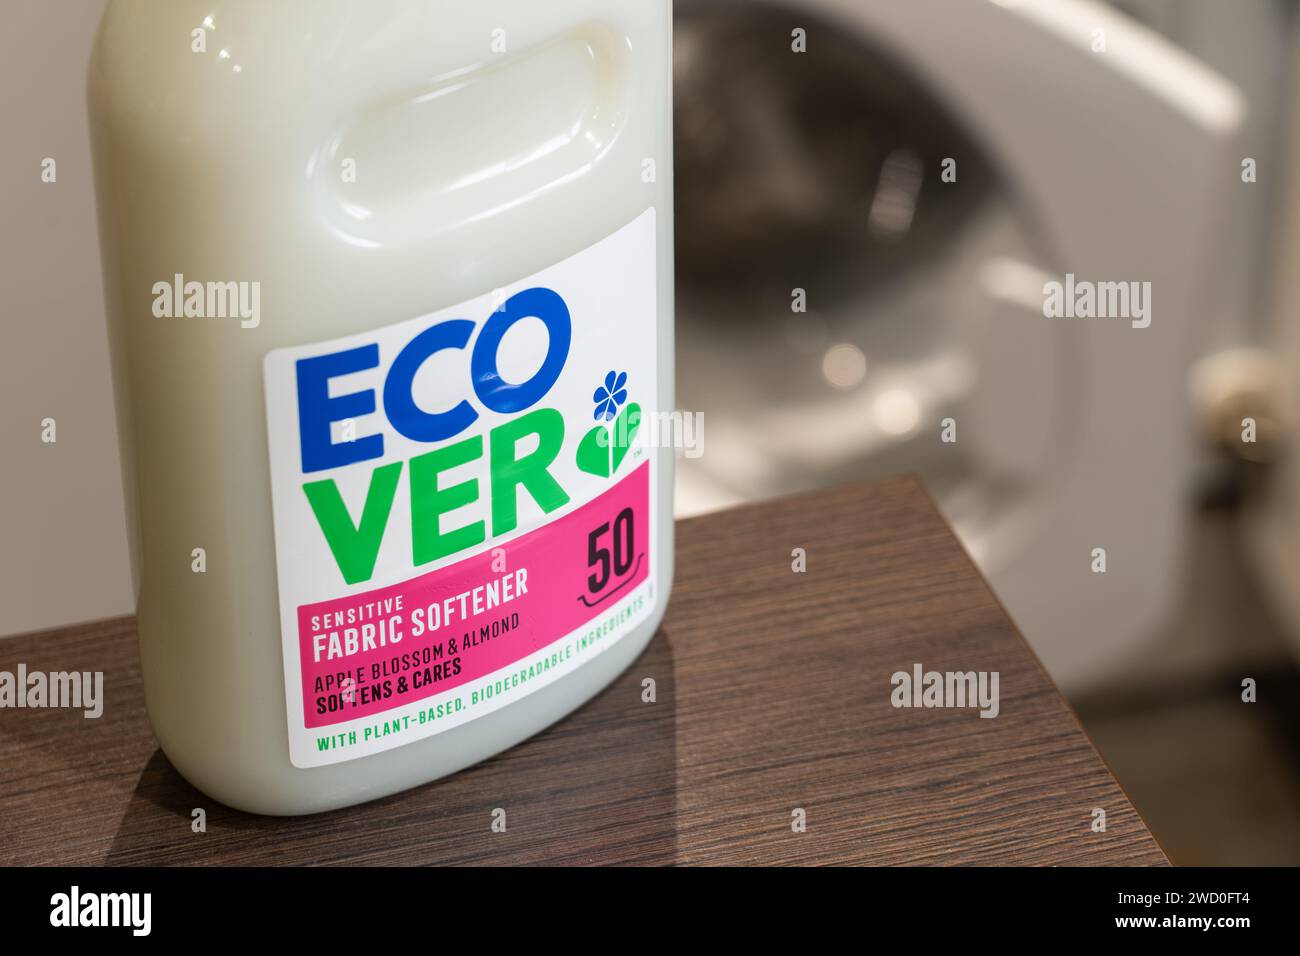 Fabric softener with plant based biodegradable ingredients by Ecover, a Belgian company that makes ecologically sound cleaning products. UK Stock Photo